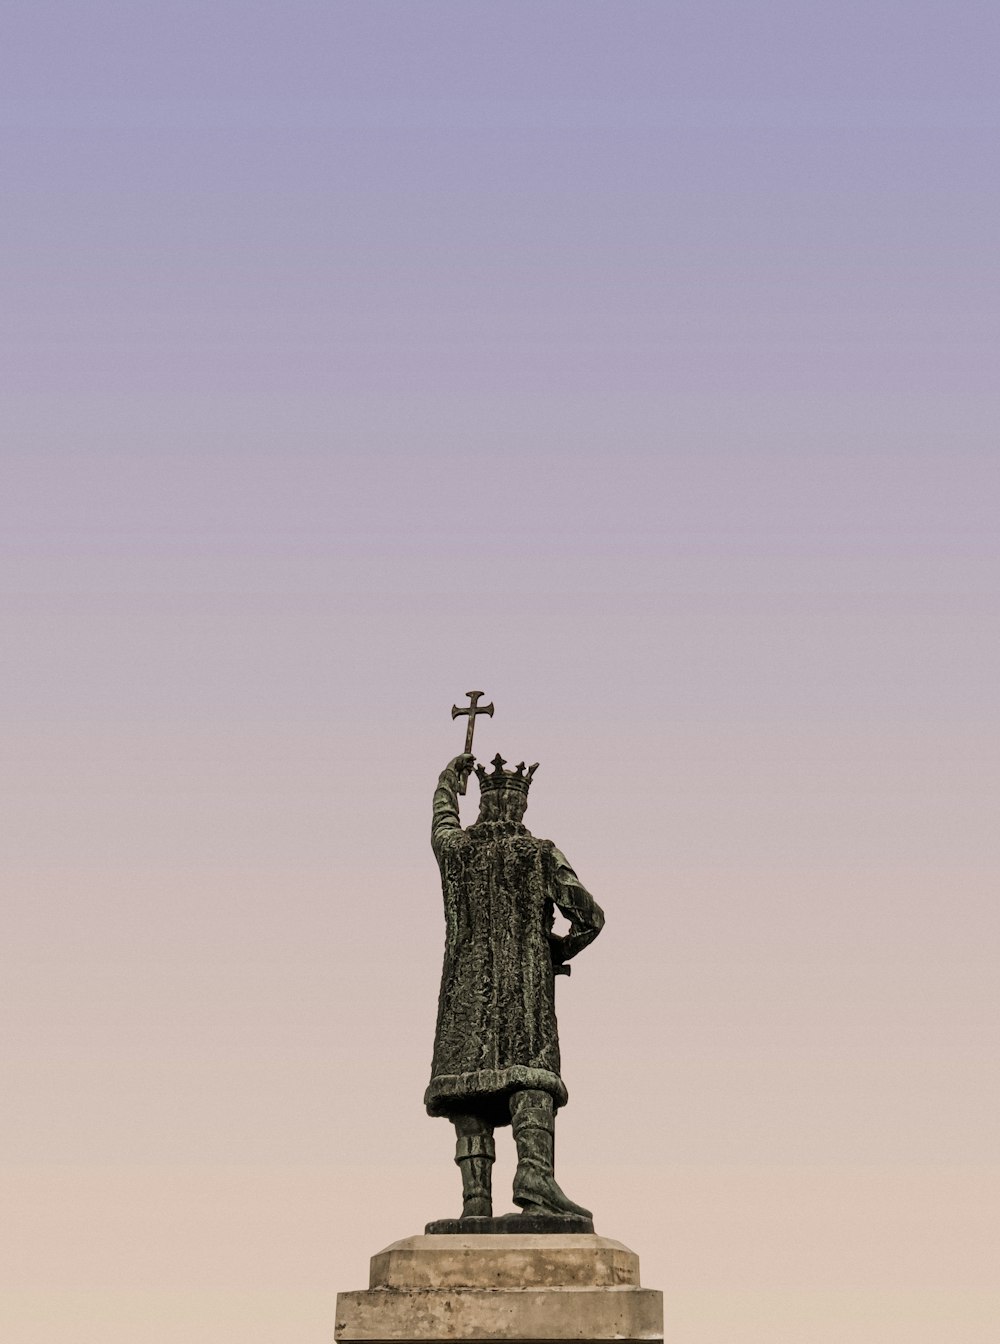 black statue of man on top of the mountain